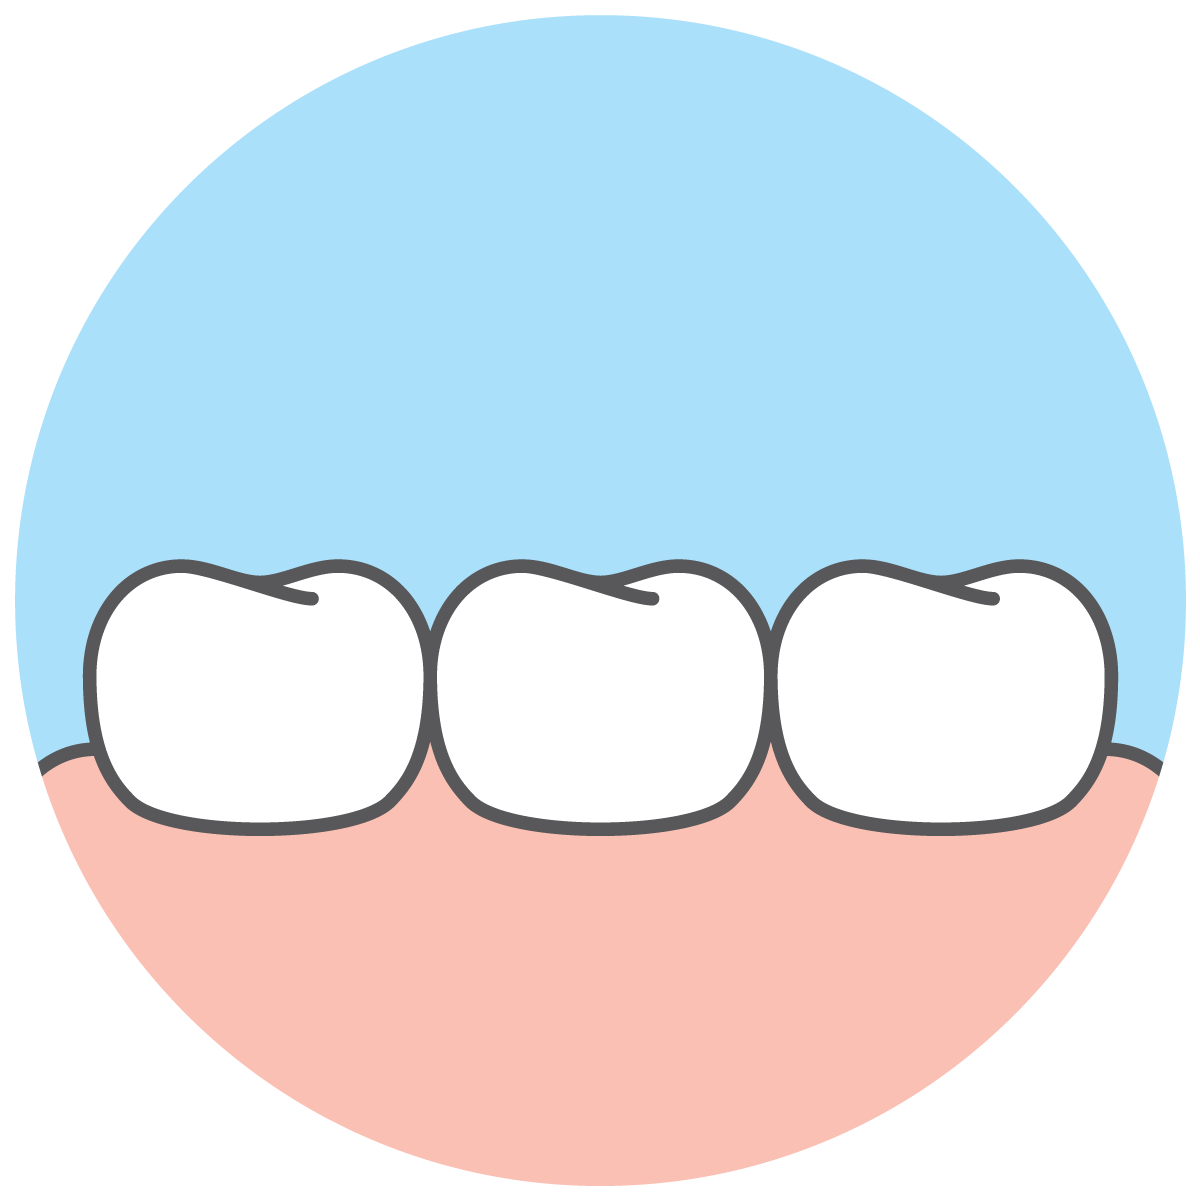 healthy teeth and gums illustration